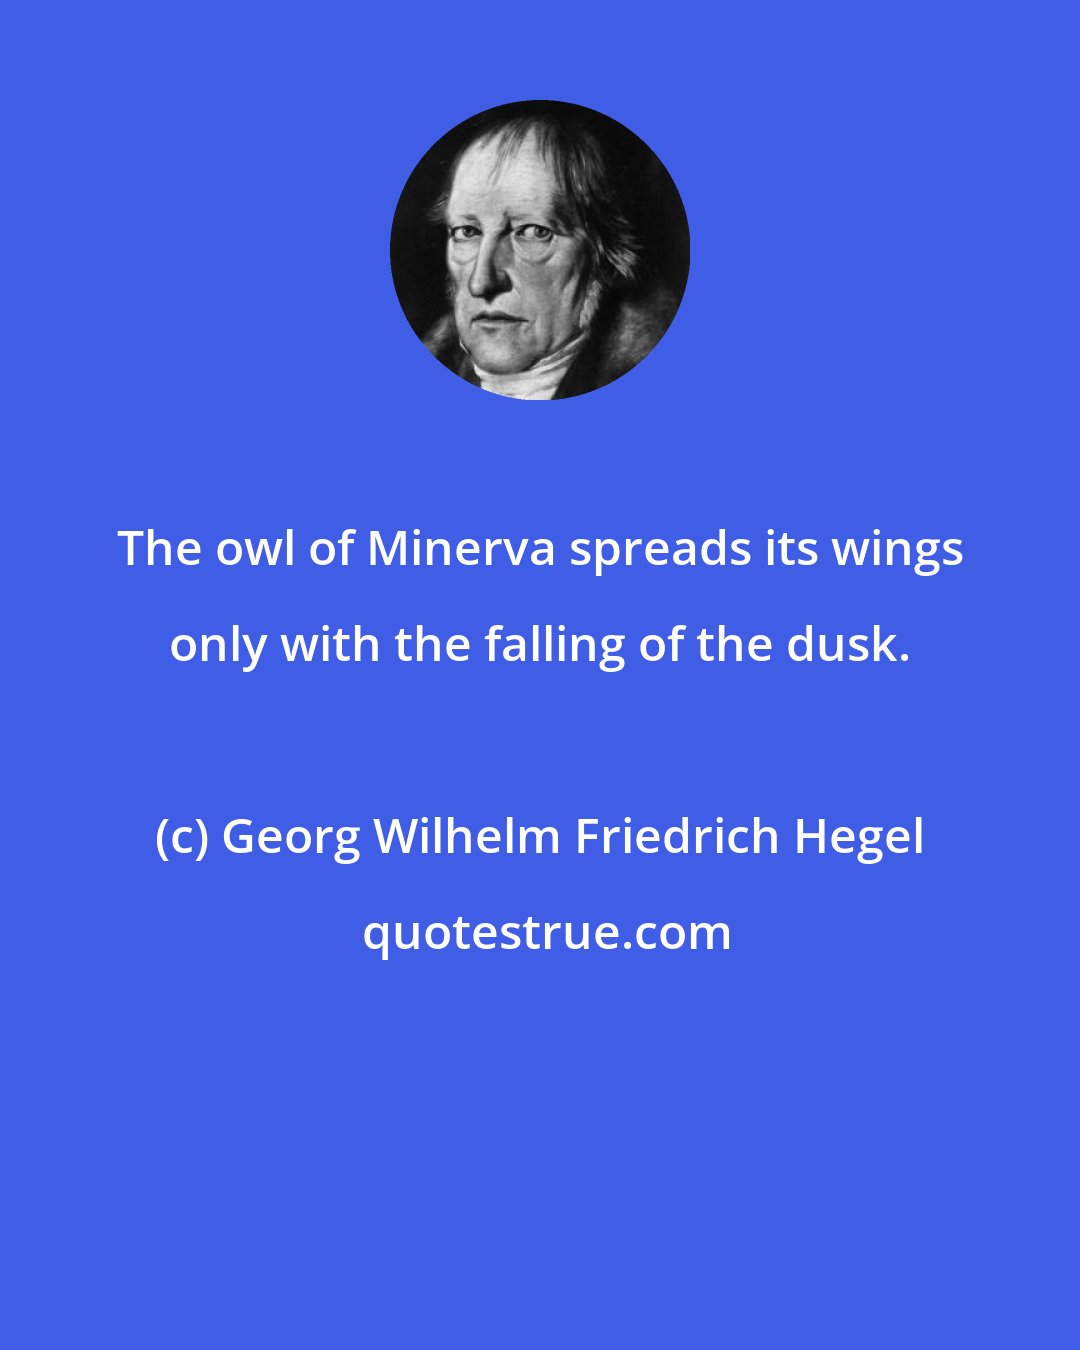 Georg Wilhelm Friedrich Hegel: The owl of Minerva spreads its wings only with the falling of the dusk.